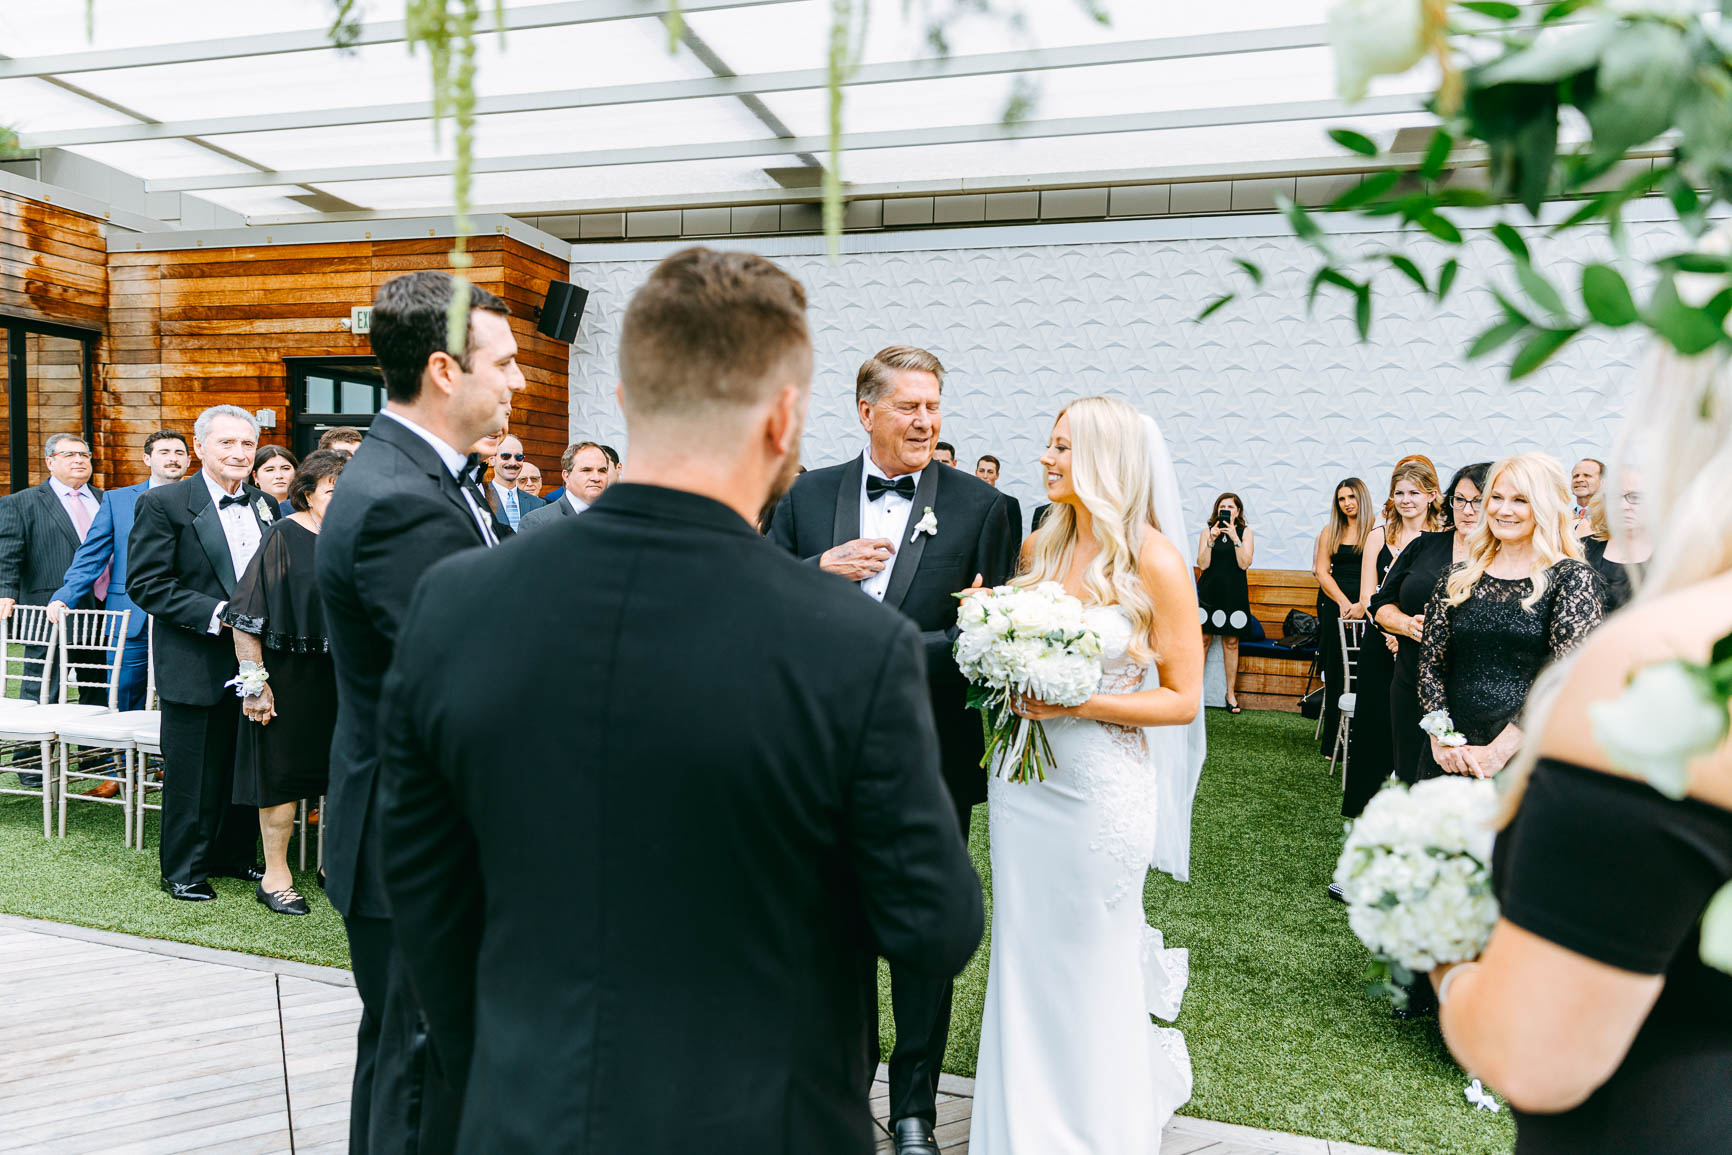 merchant & trade rooftop wedding ceremony in uptown Charlotte by Nhieu Tang Photography | nhieutang.com